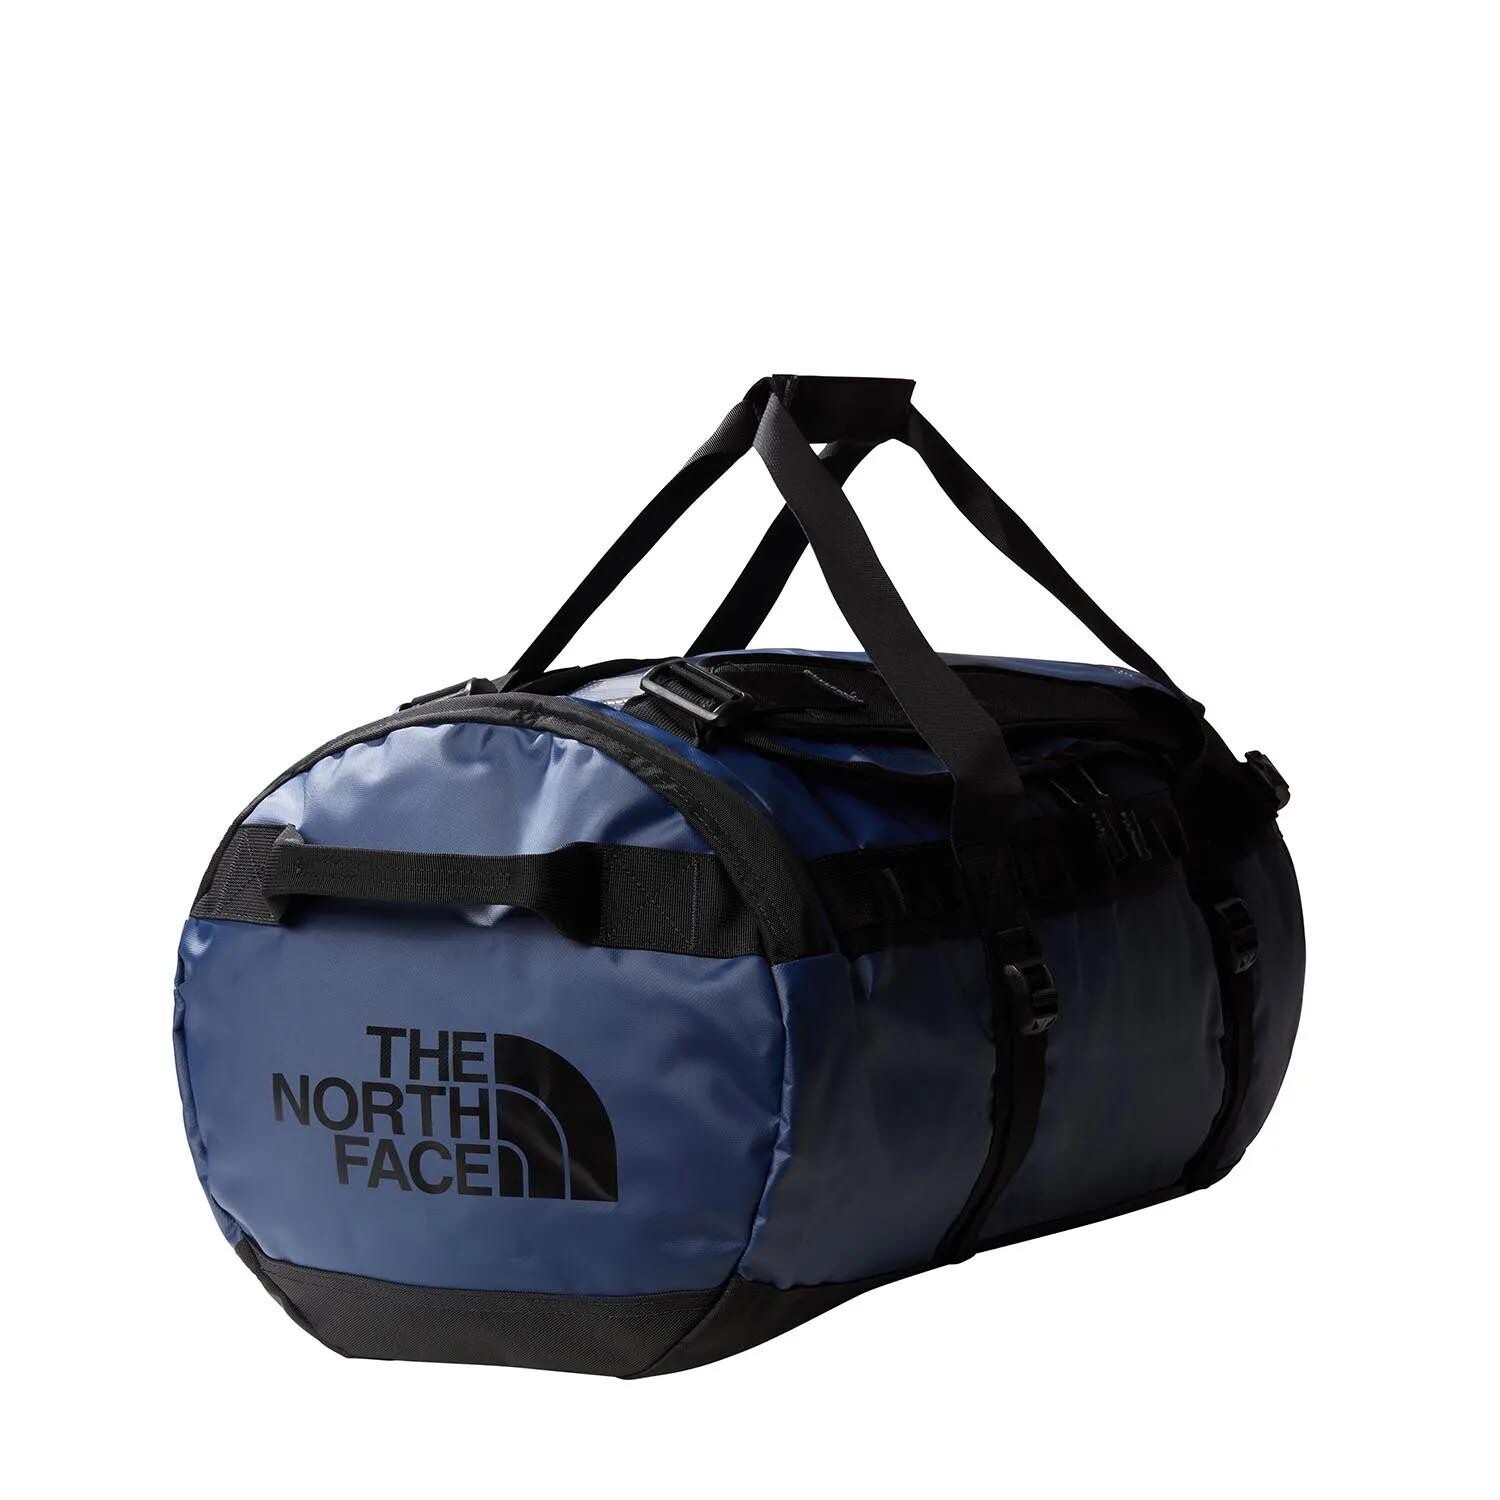 uld bison Kano The North Face Base Camp Duffel - Medium